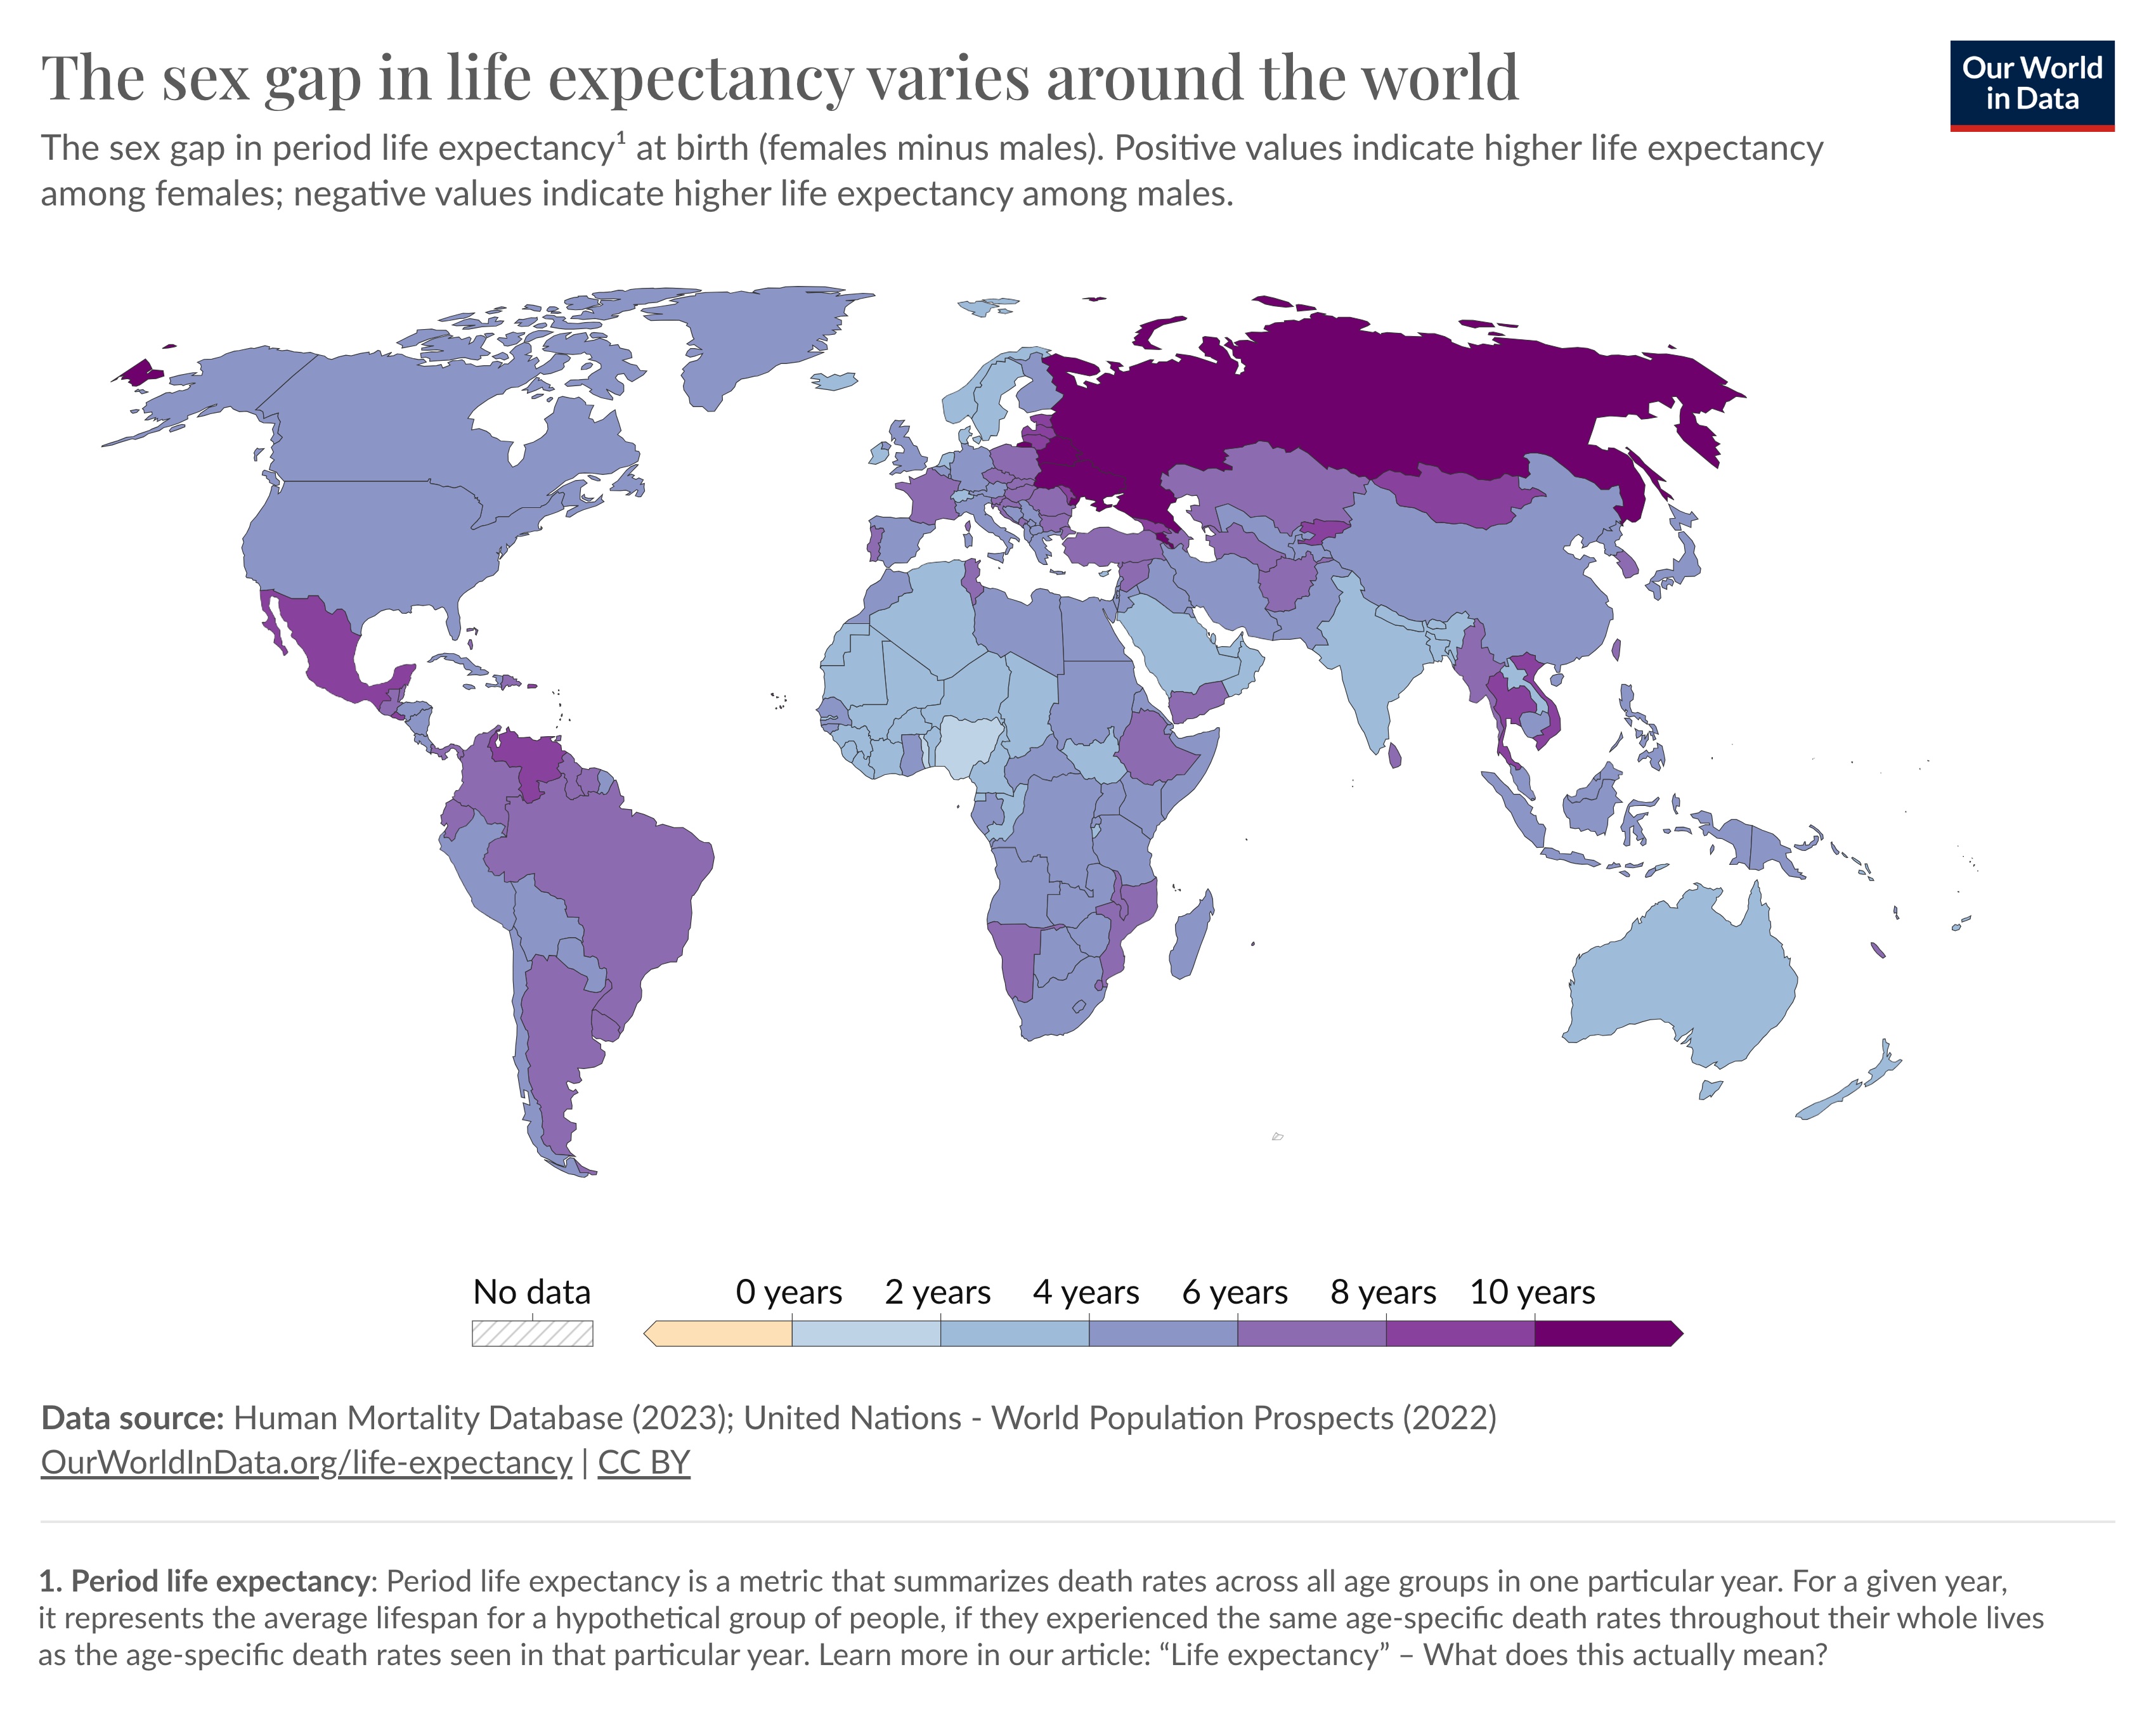 A map showing the life expectancy of people around the world.